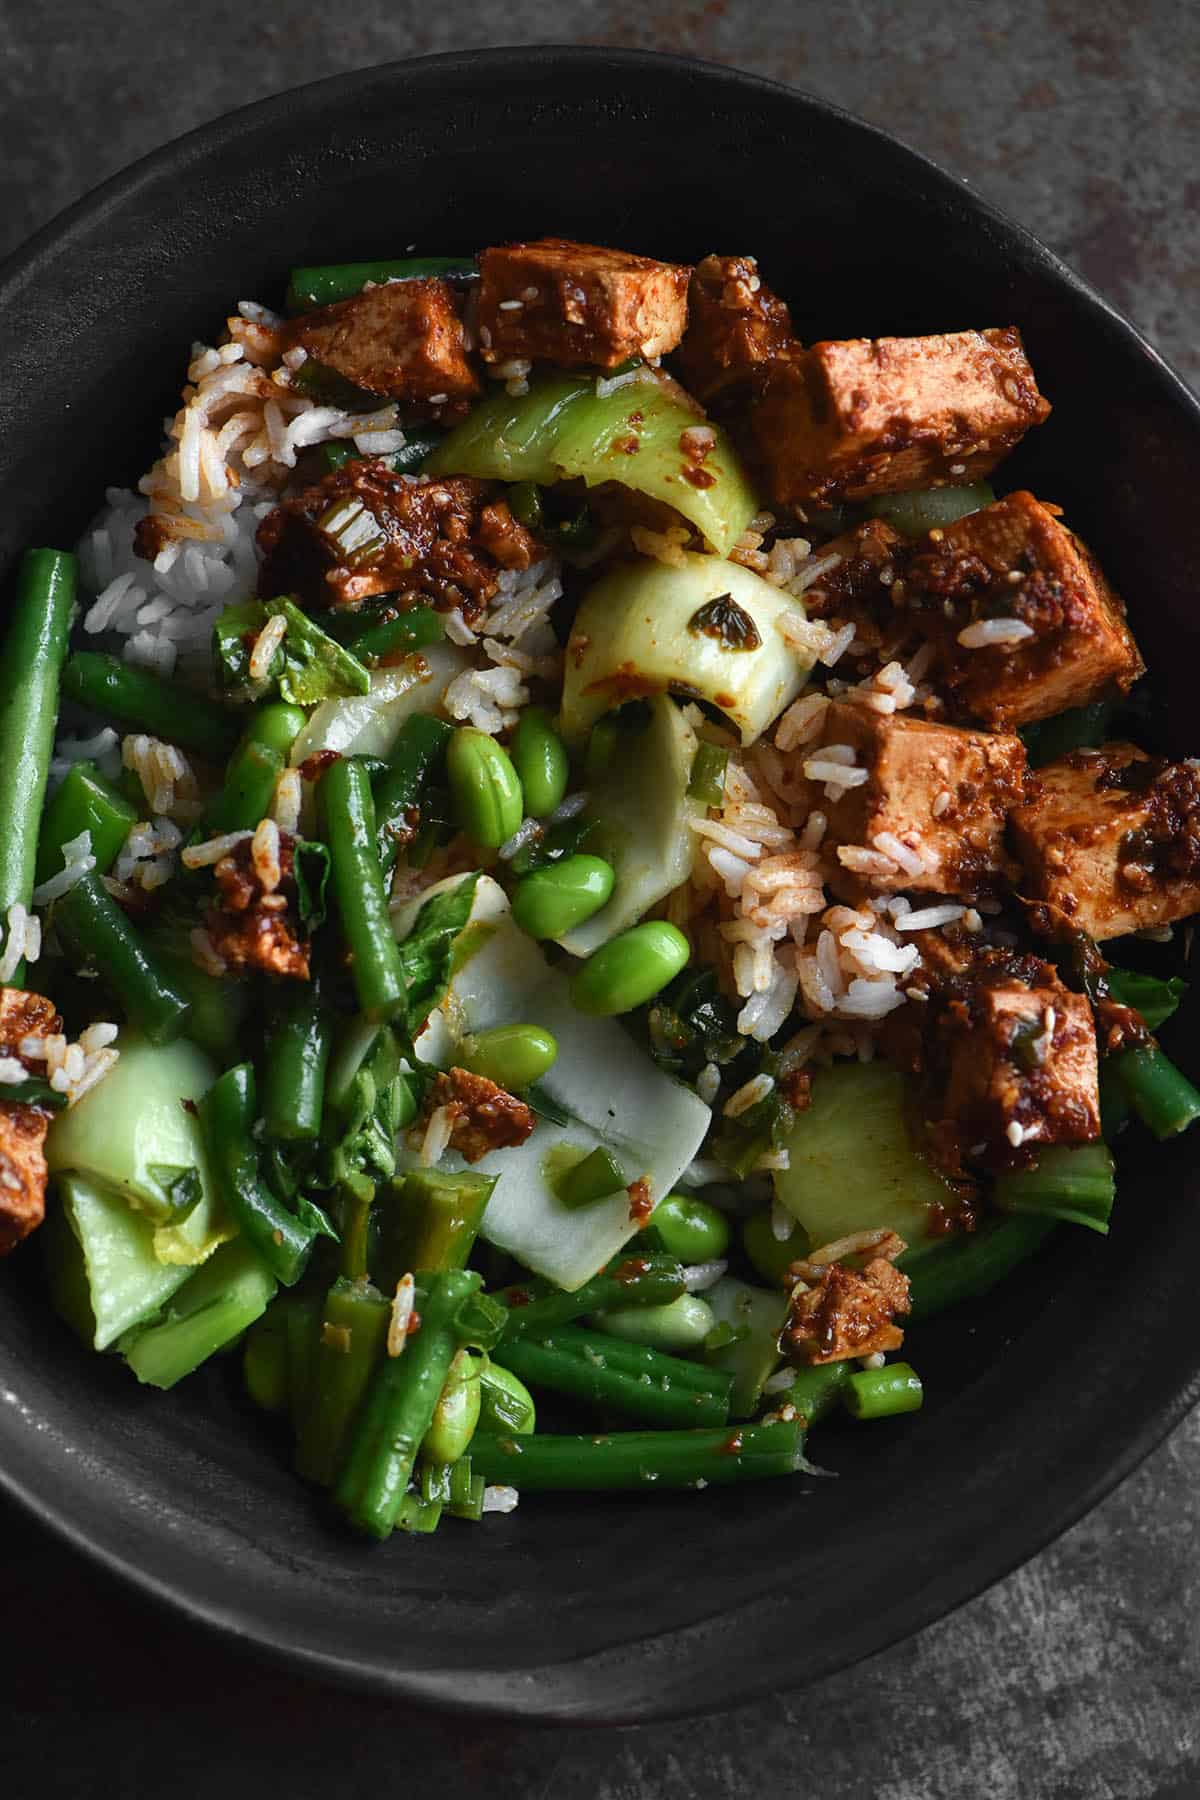 An aerial close up view of a plate of chilli oil tofu, Asian greens and rice that have been mixed together and look casually plated. The meal is served in a dark grey ceramic bowl and sits against a mottled dark silver metal backdrop